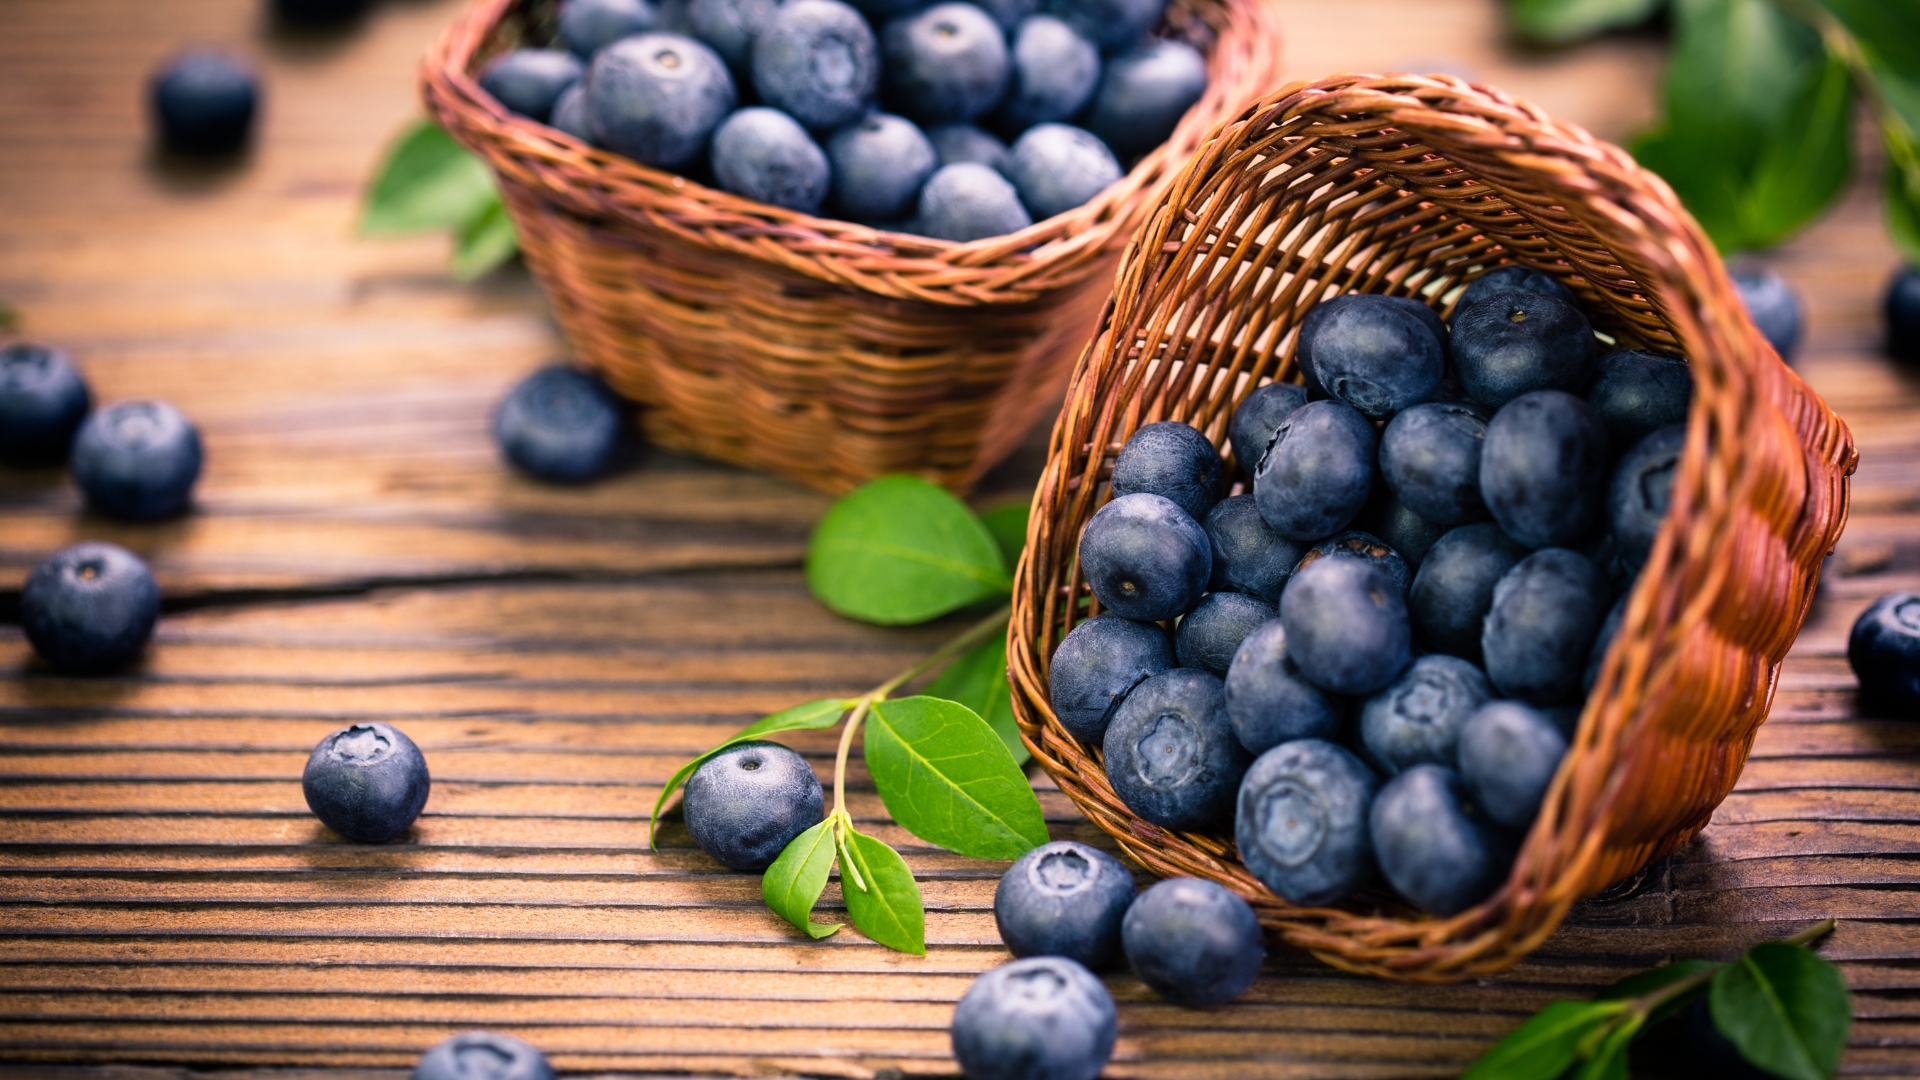 If You Believed These Blueberry Facts Were True, Prepared To Be Shocked